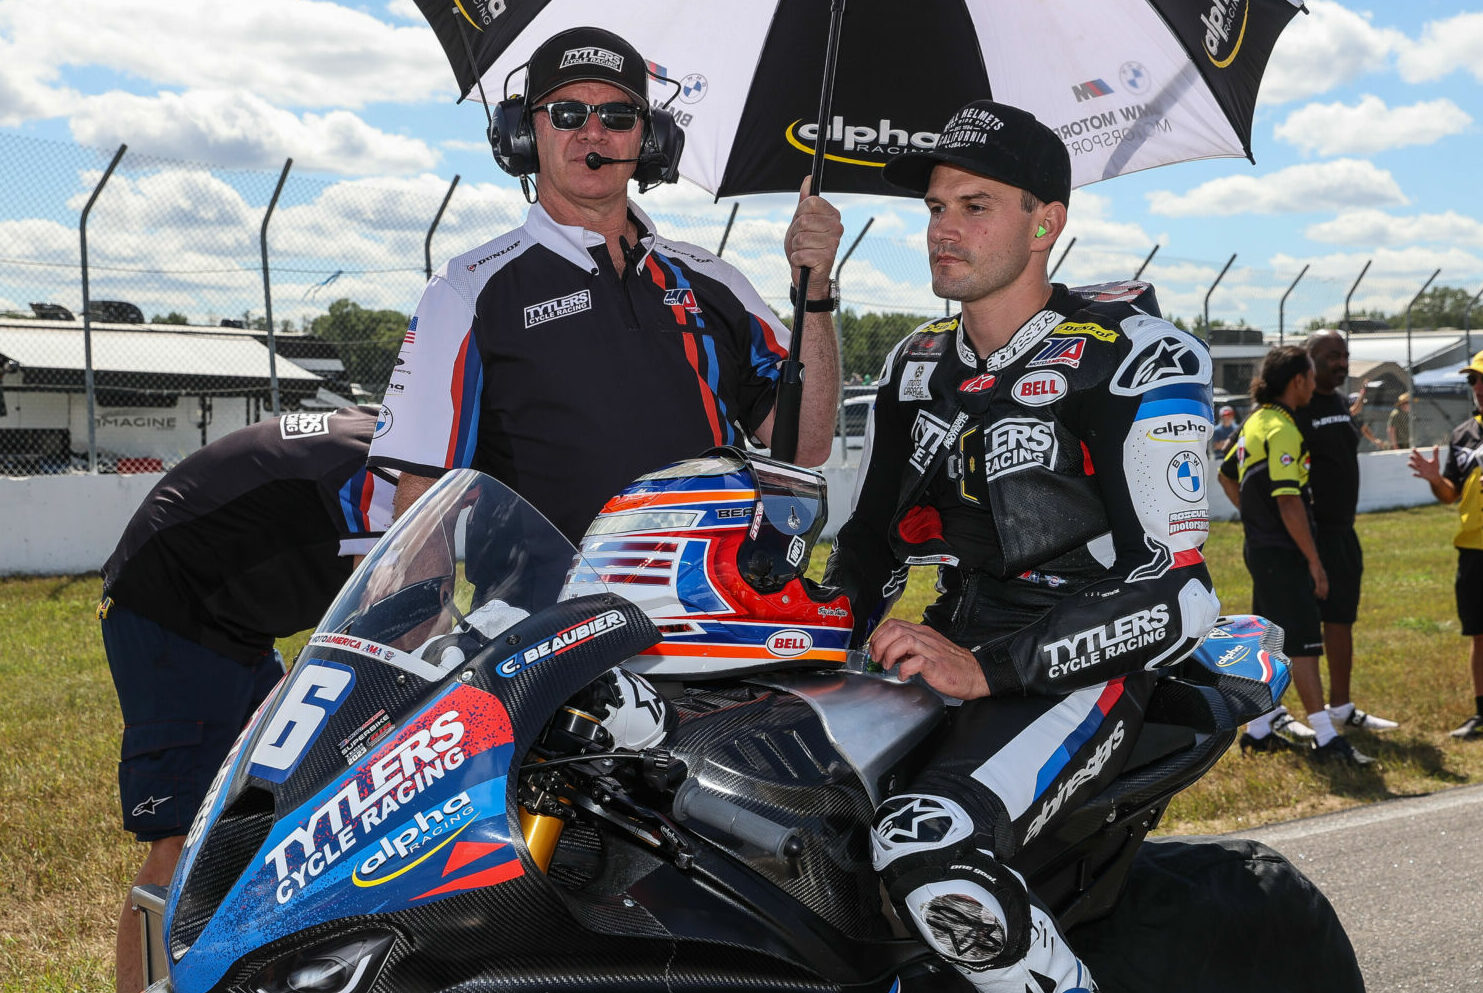 Cameron Beaubier (right) with his Crew Chief Dave Weaver (left) on the grid prior to Superbike Race One at Brainerd. Photo by Brian J. Nelson.